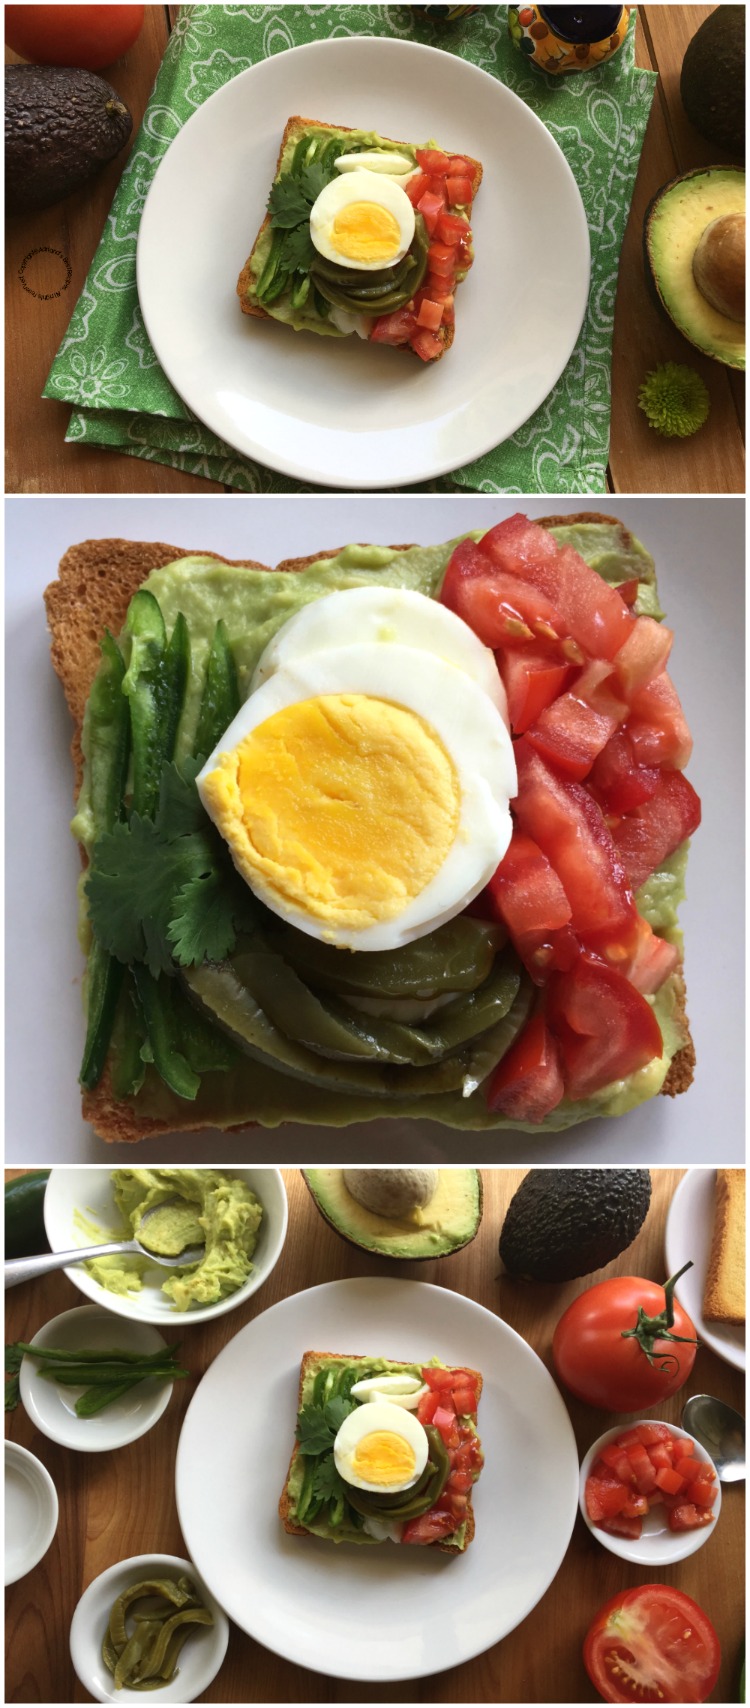 A Mexican Avocado Toast and a food trend to celebrate Hispanic Heritage is the perfect bite to start the day with a yummy breakfast or to enjoy for a quick lunch or after working out